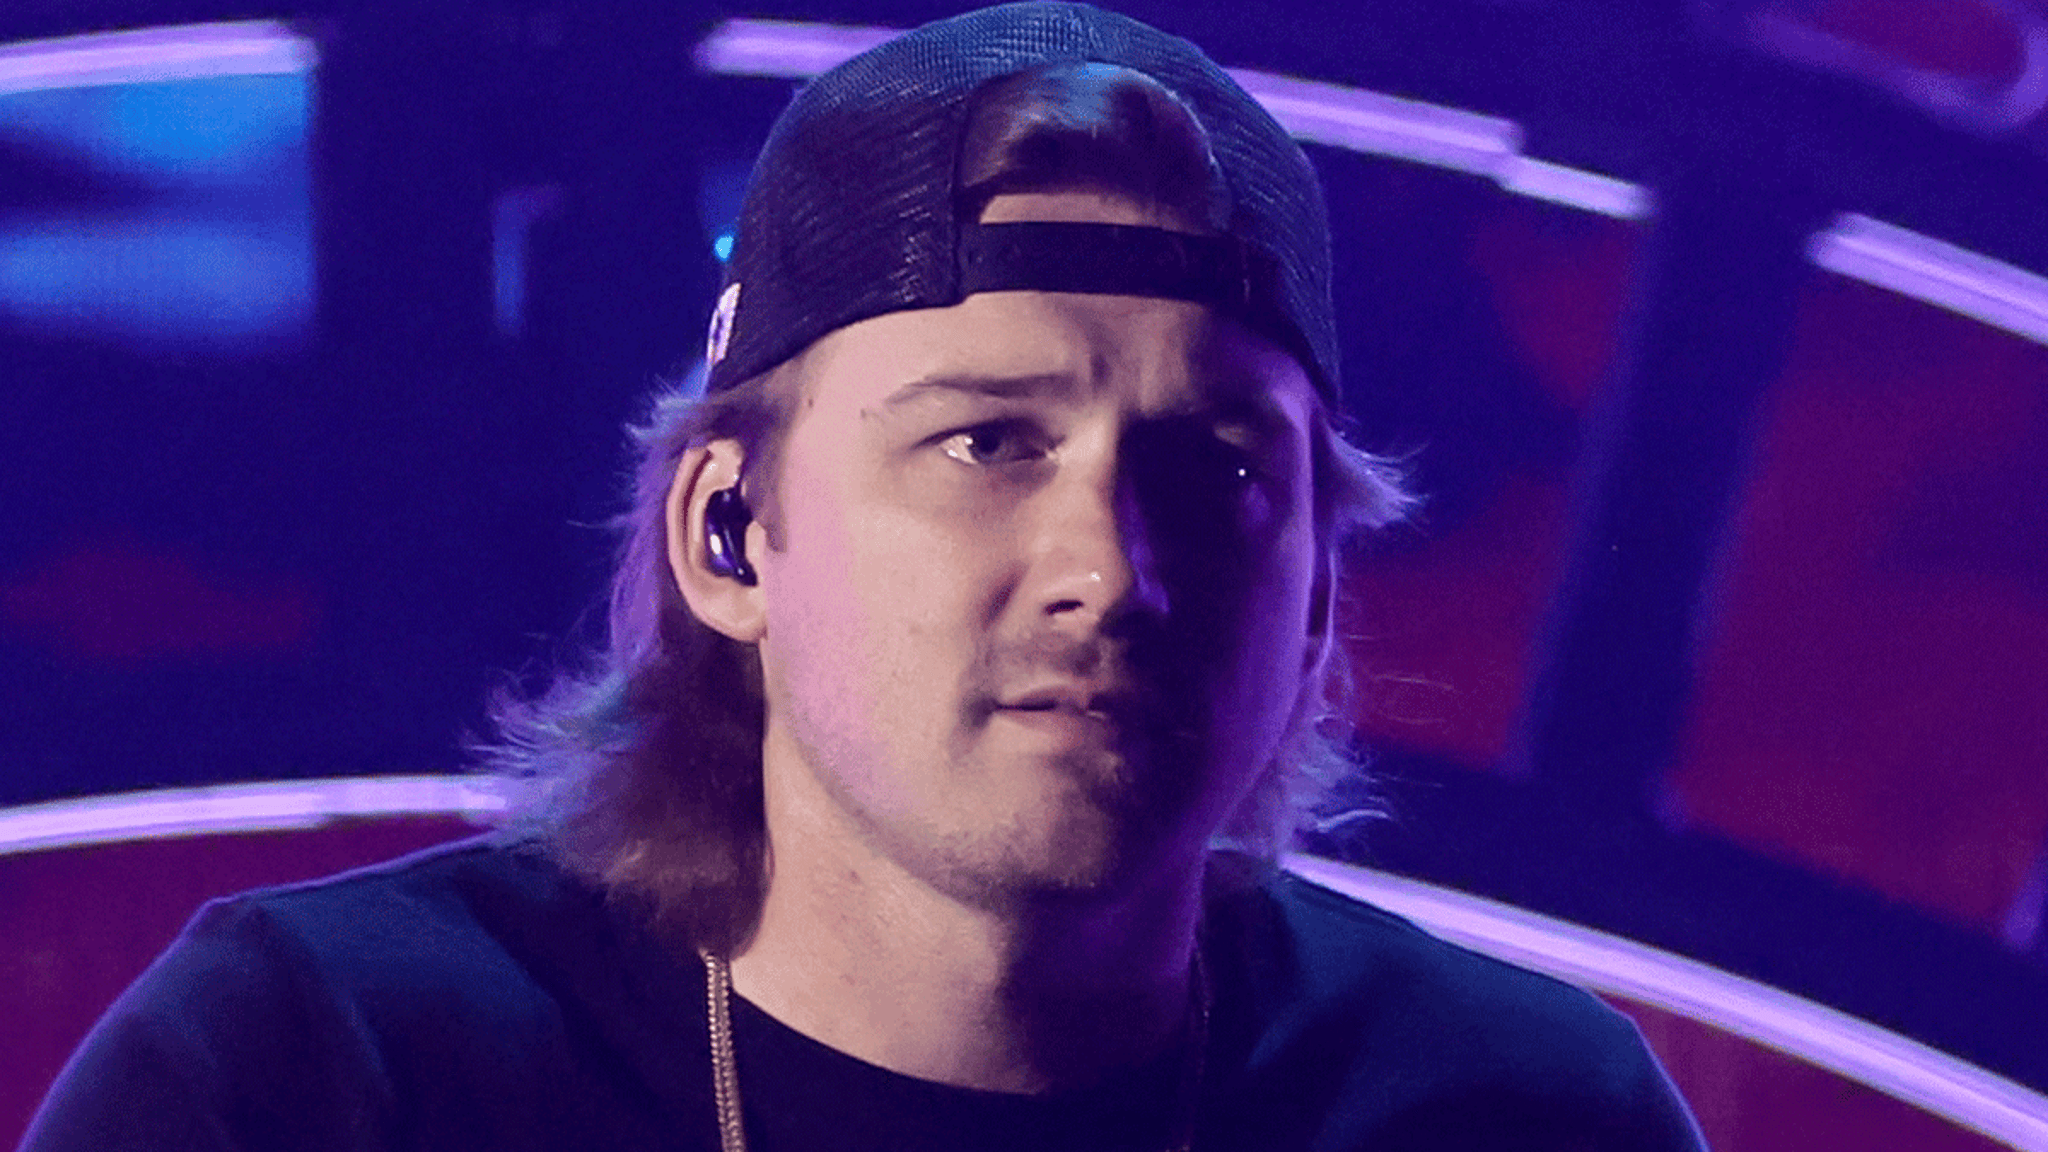 Morgan Wallen Caught Pouring Drink Down Woman's Blouse in Nashville Bar